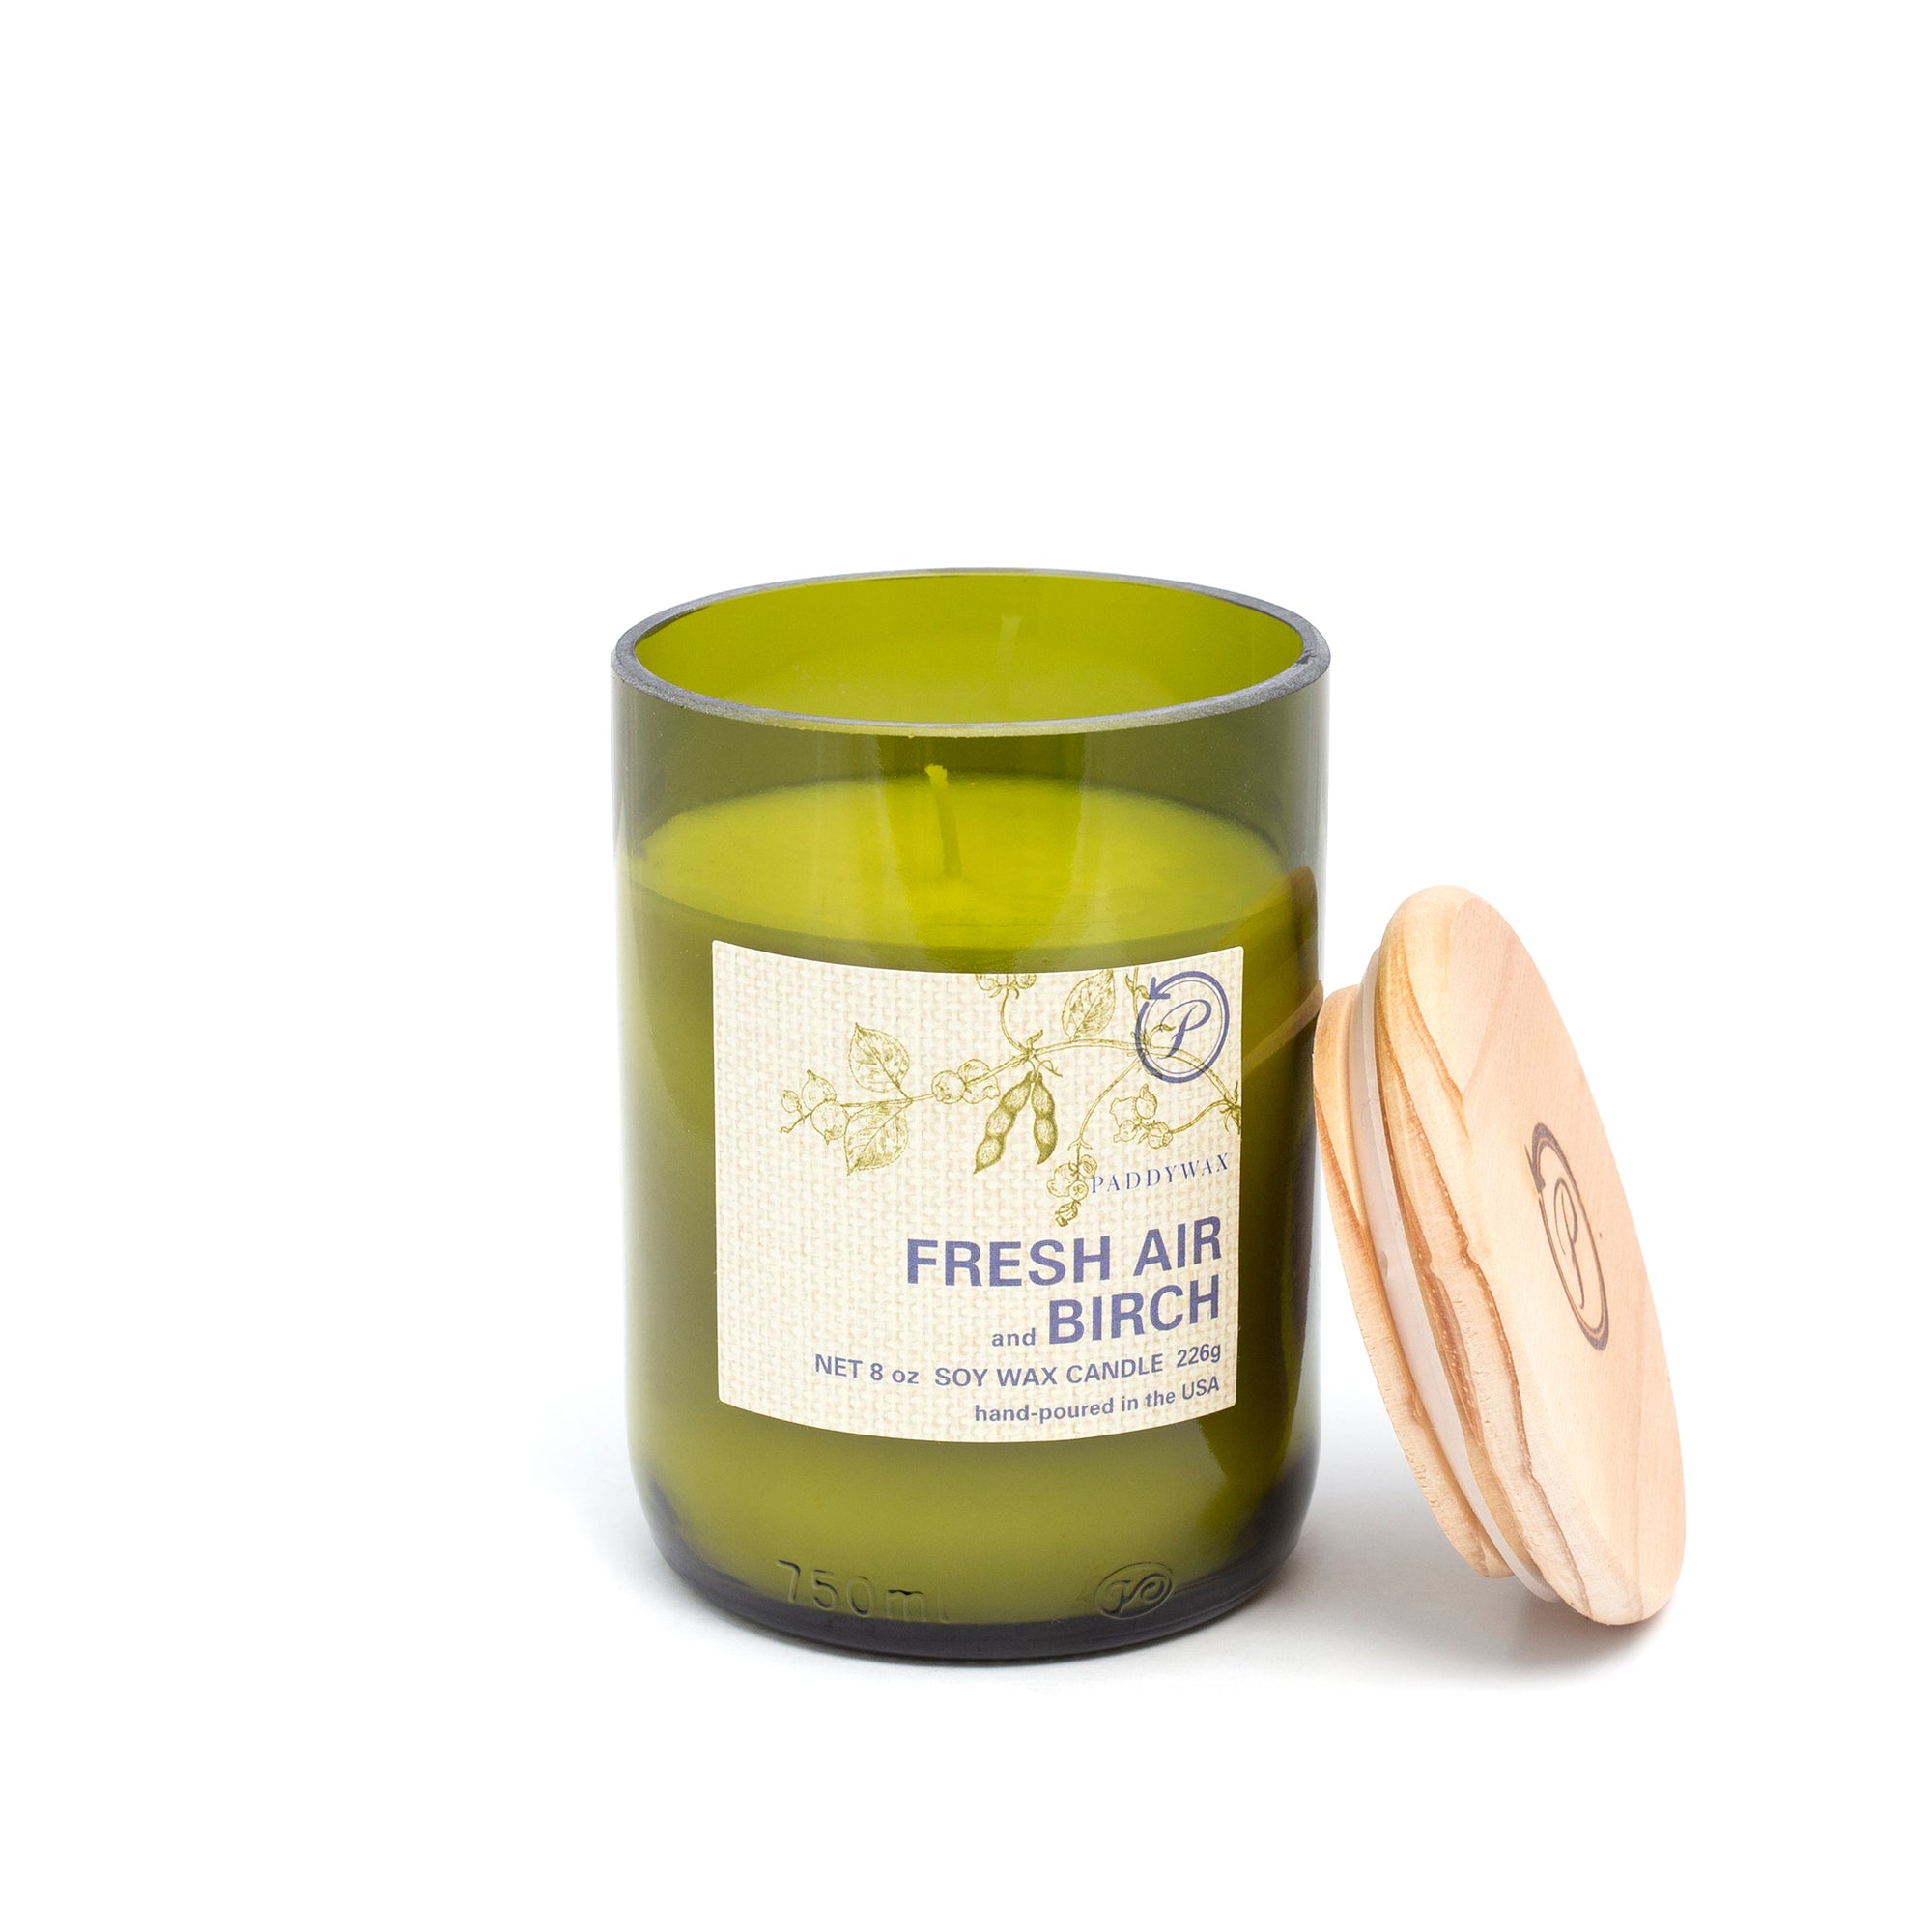 Paddy Wax Eco Green Recycled Glass Candle (226g) - Fresh Air & Birch